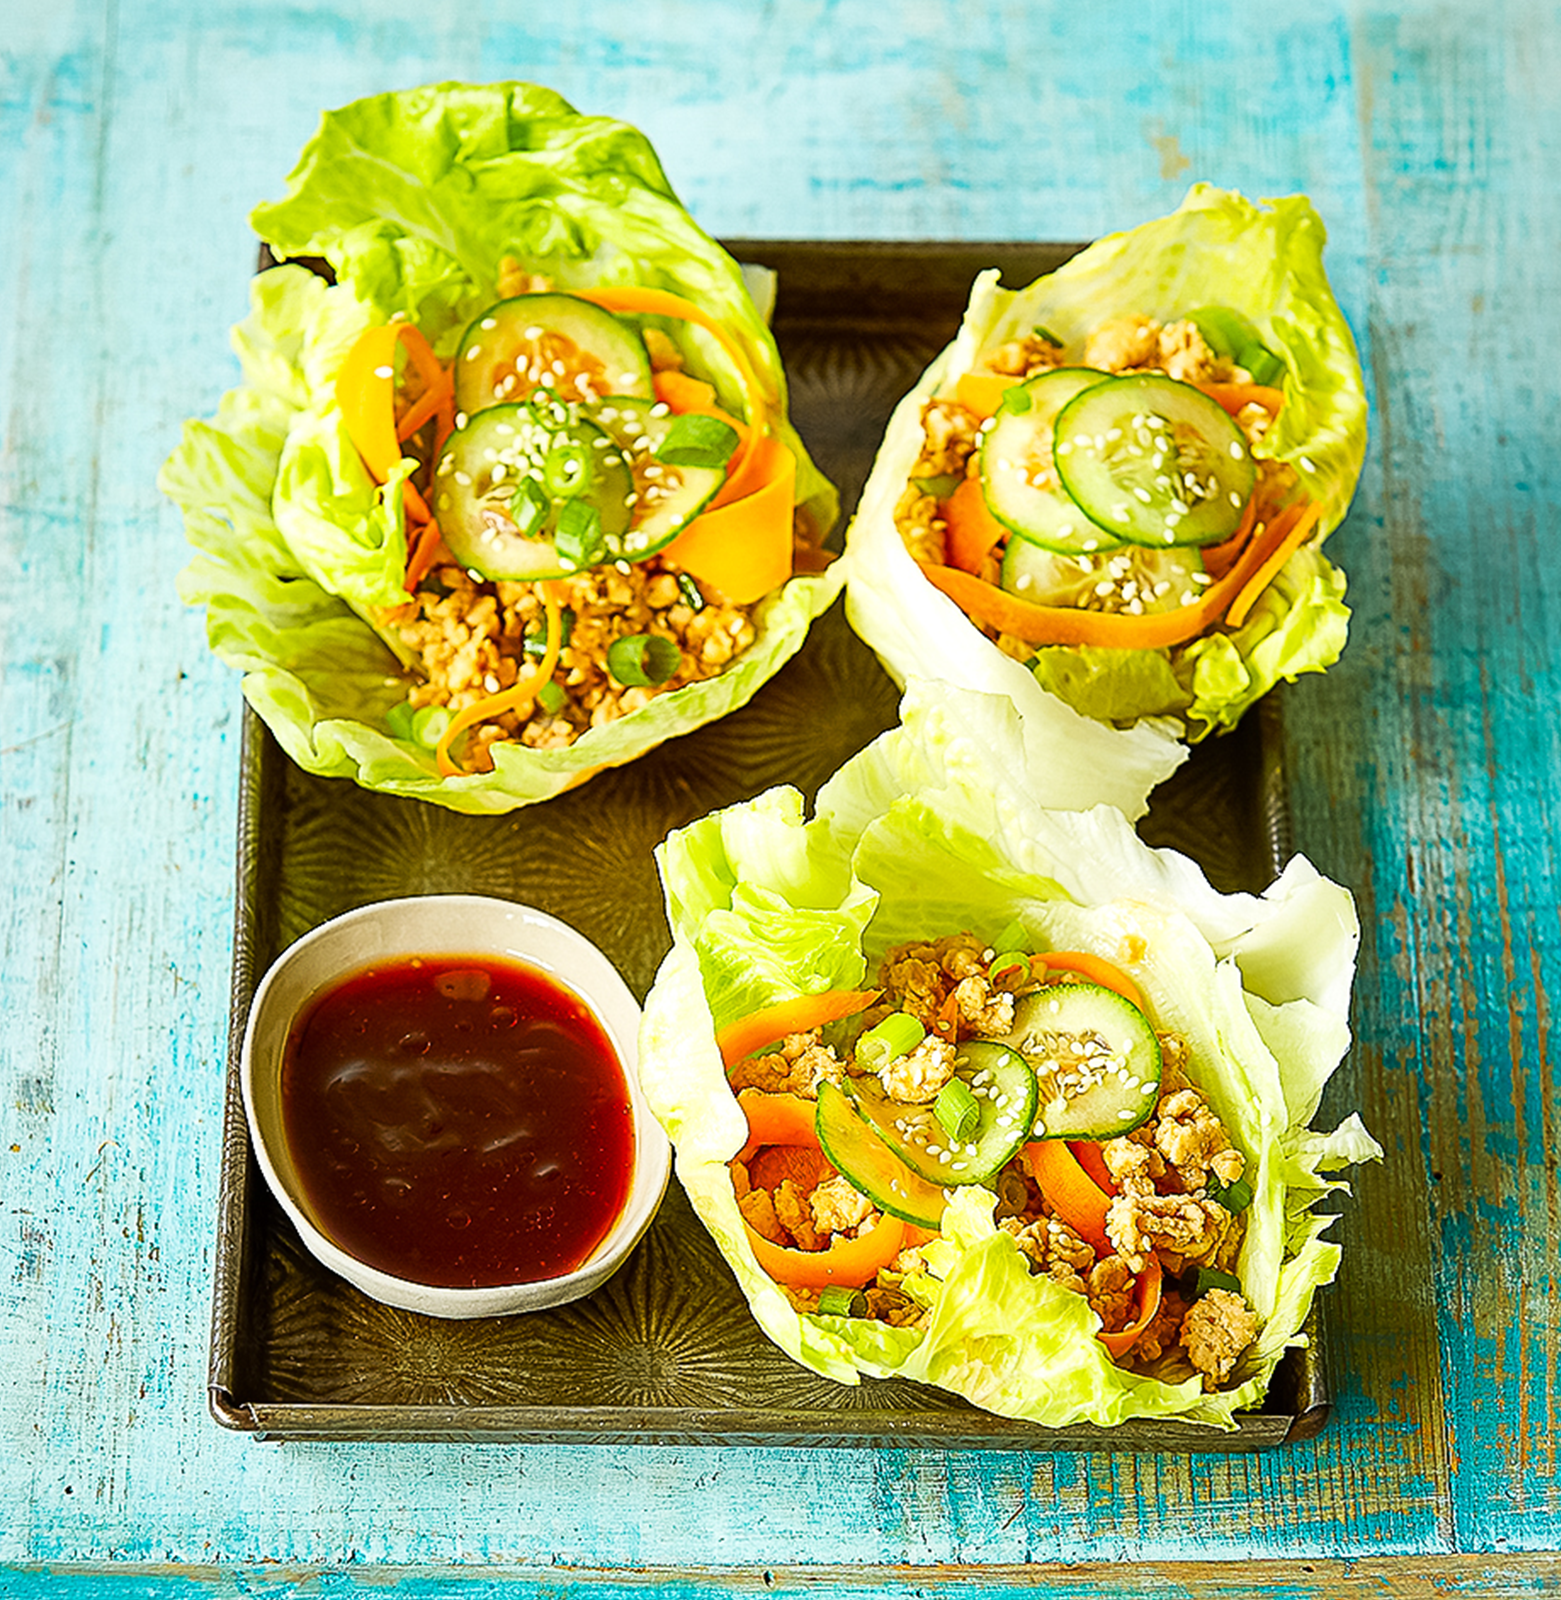 3 large iceberg lettuce leaves filled with spicy chicken mince filling arranged on a wooden board with a small dish of tamari and chilli sauce.